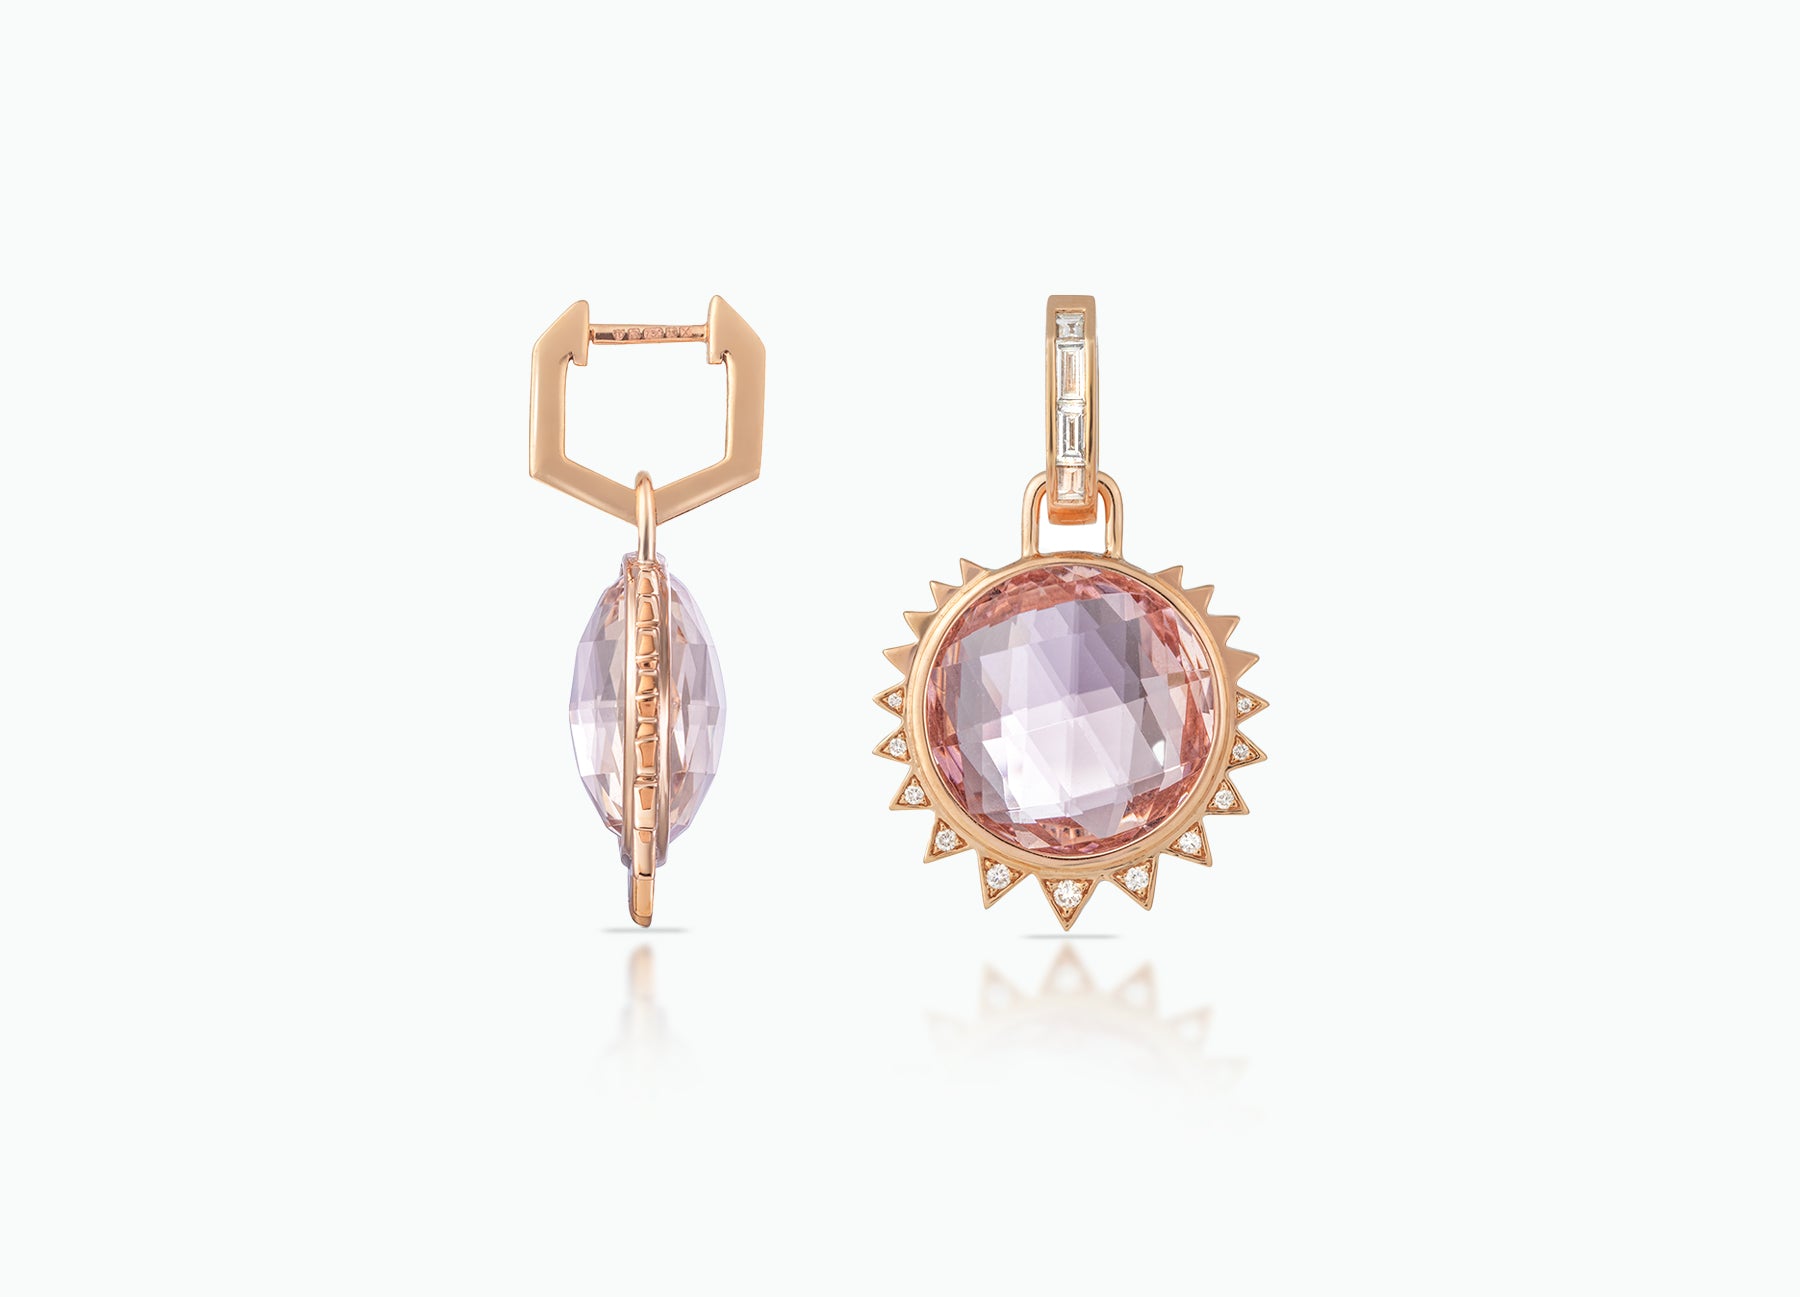 Huggie earrings with detachable Morganite Star Extensions. Made from rose, yellow or white 18k Gold with central pink Morganite and round white Diamonds.